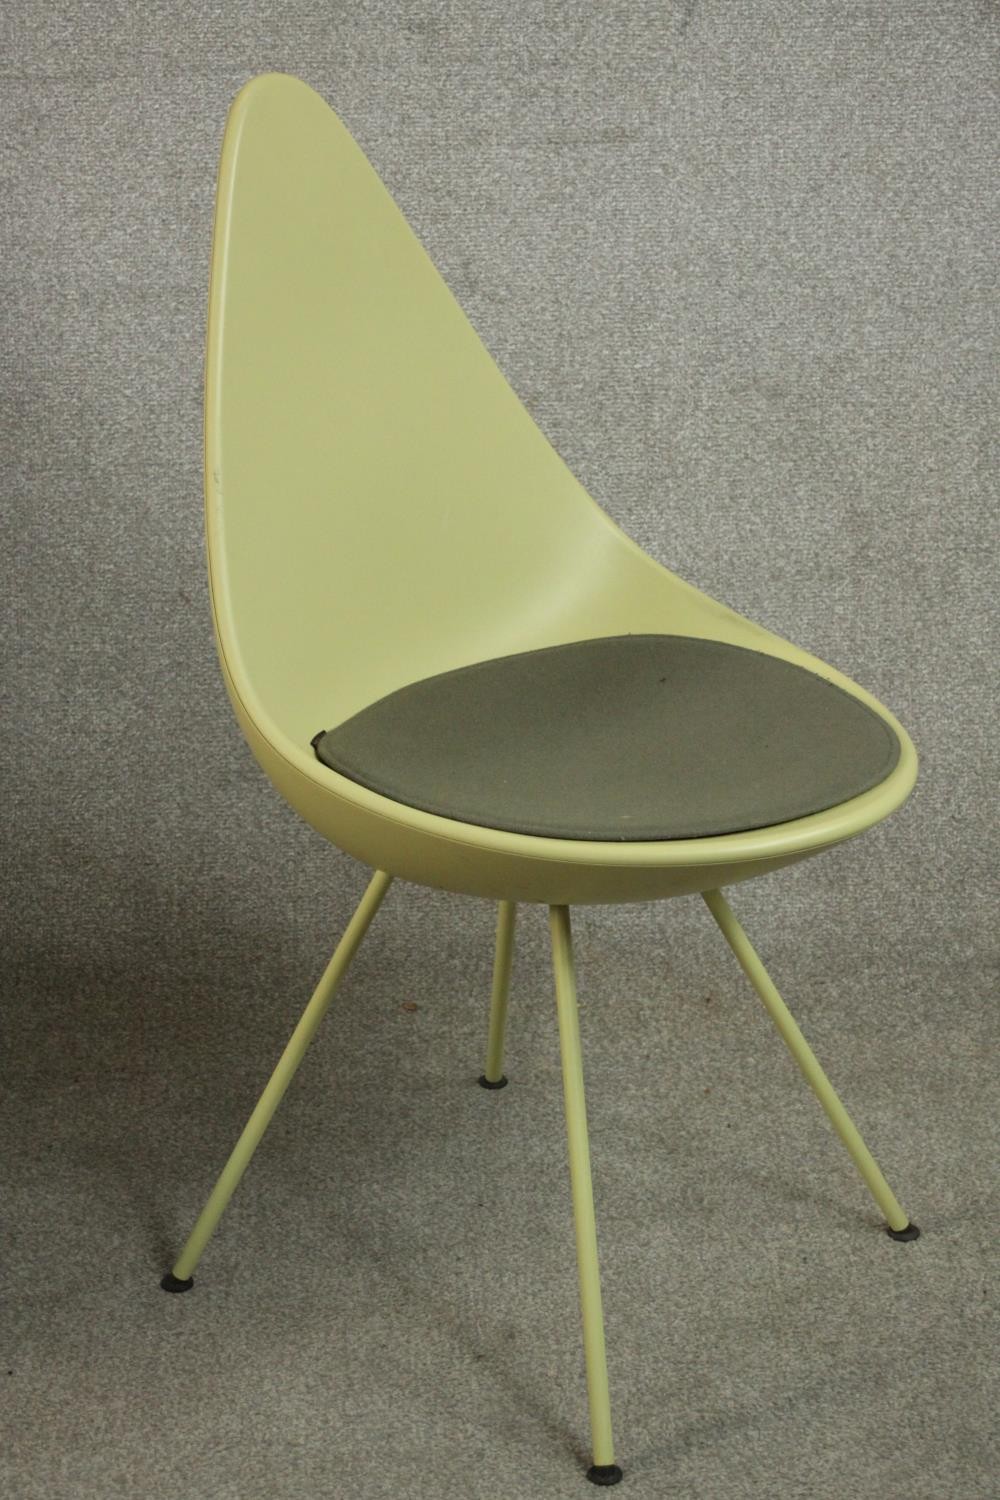 Arne Jacobsen for Republic of Fritz Hansen; a pair of Model 3110 Drop chairs, with a moulded plastic - Image 2 of 6